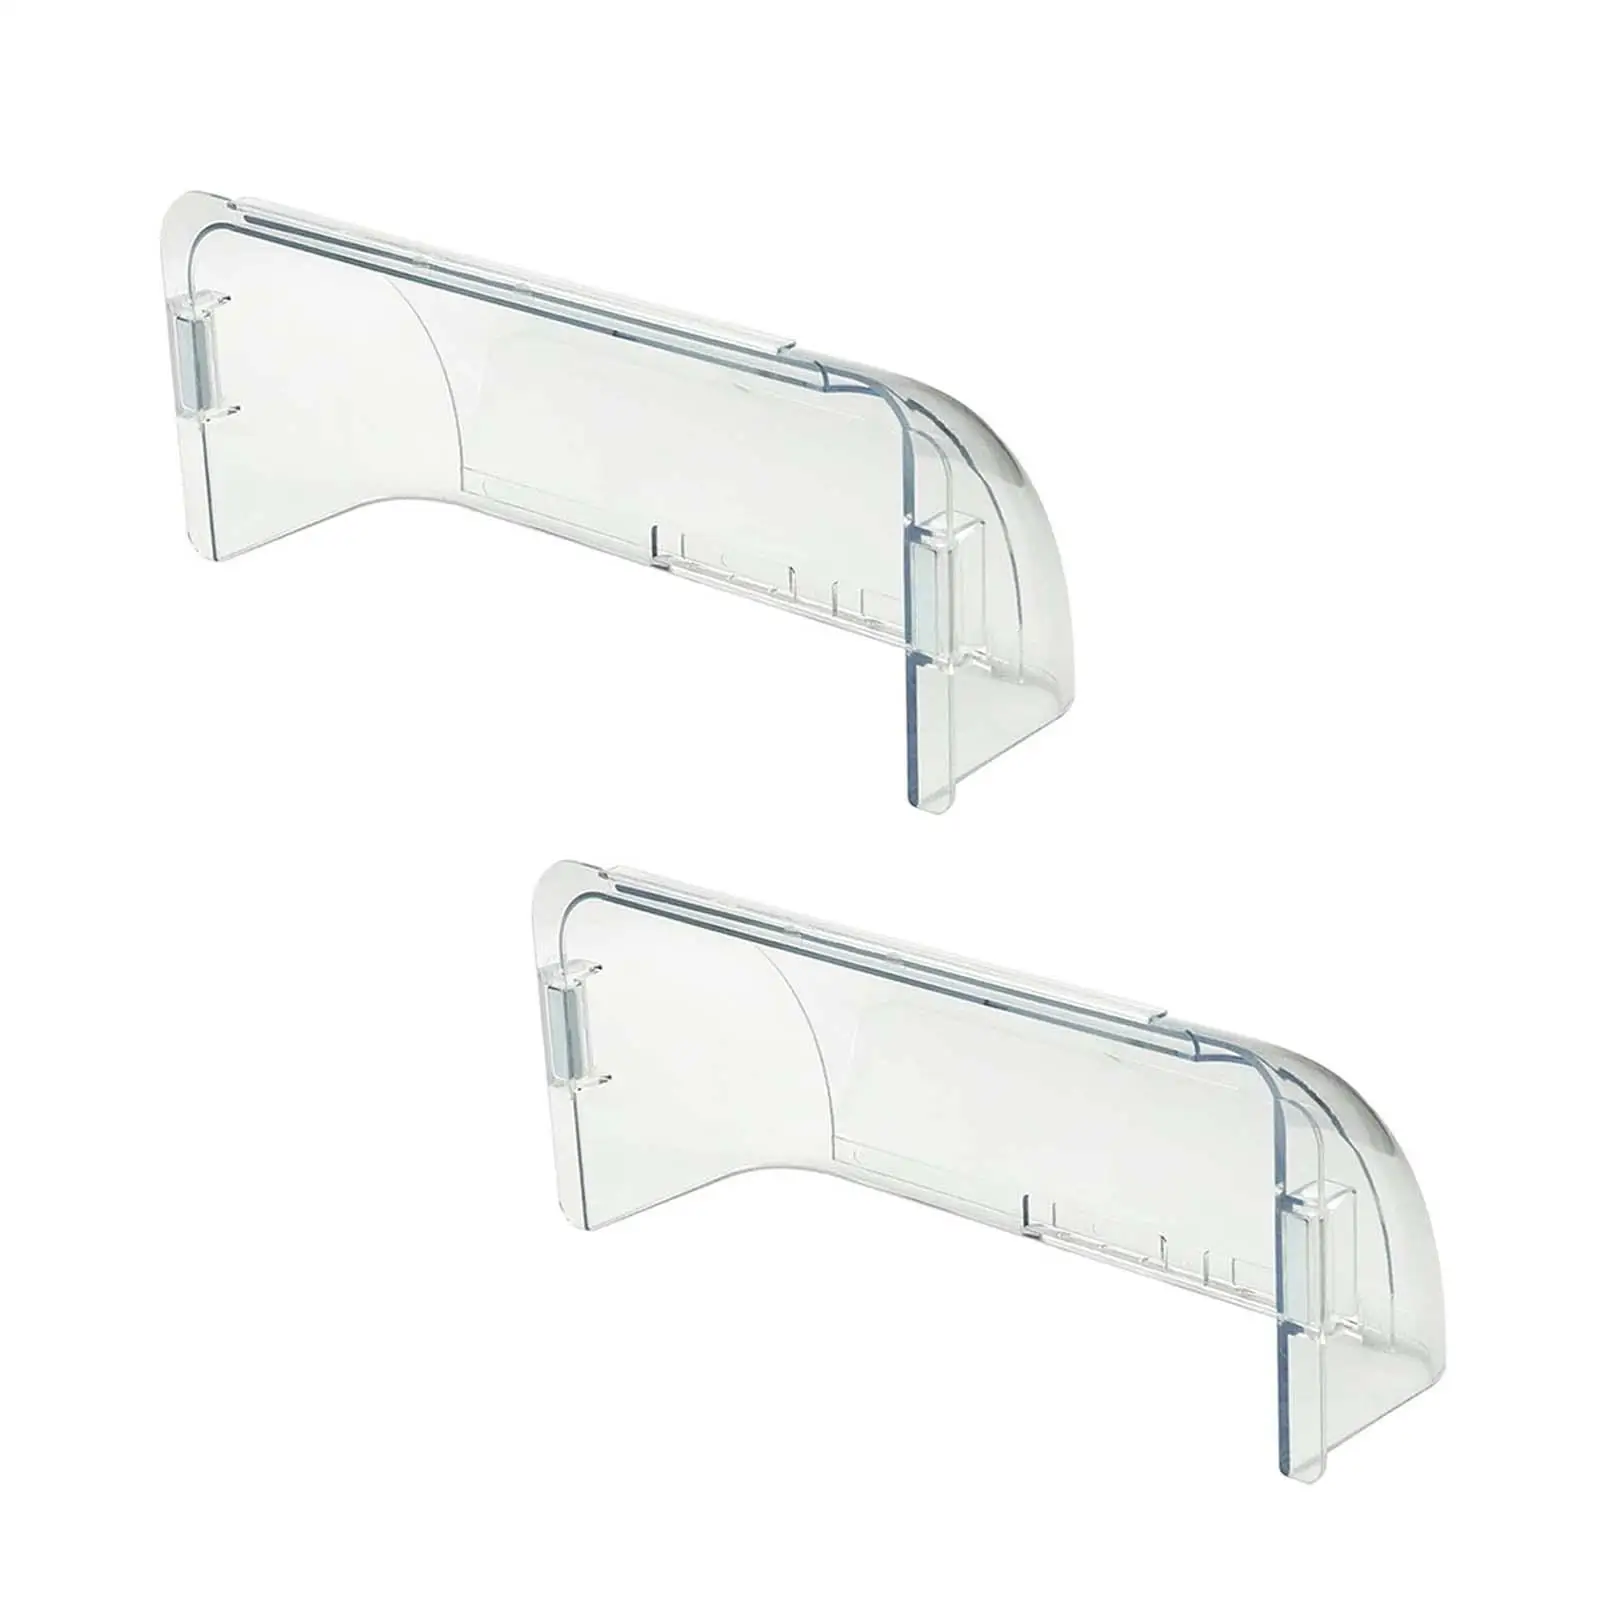 2x Vent Covers Adjustable Air Vent Deflector 9-14 Transparent Deflector Unbreakable for Heat Vents Ceiling Registers Sidewall